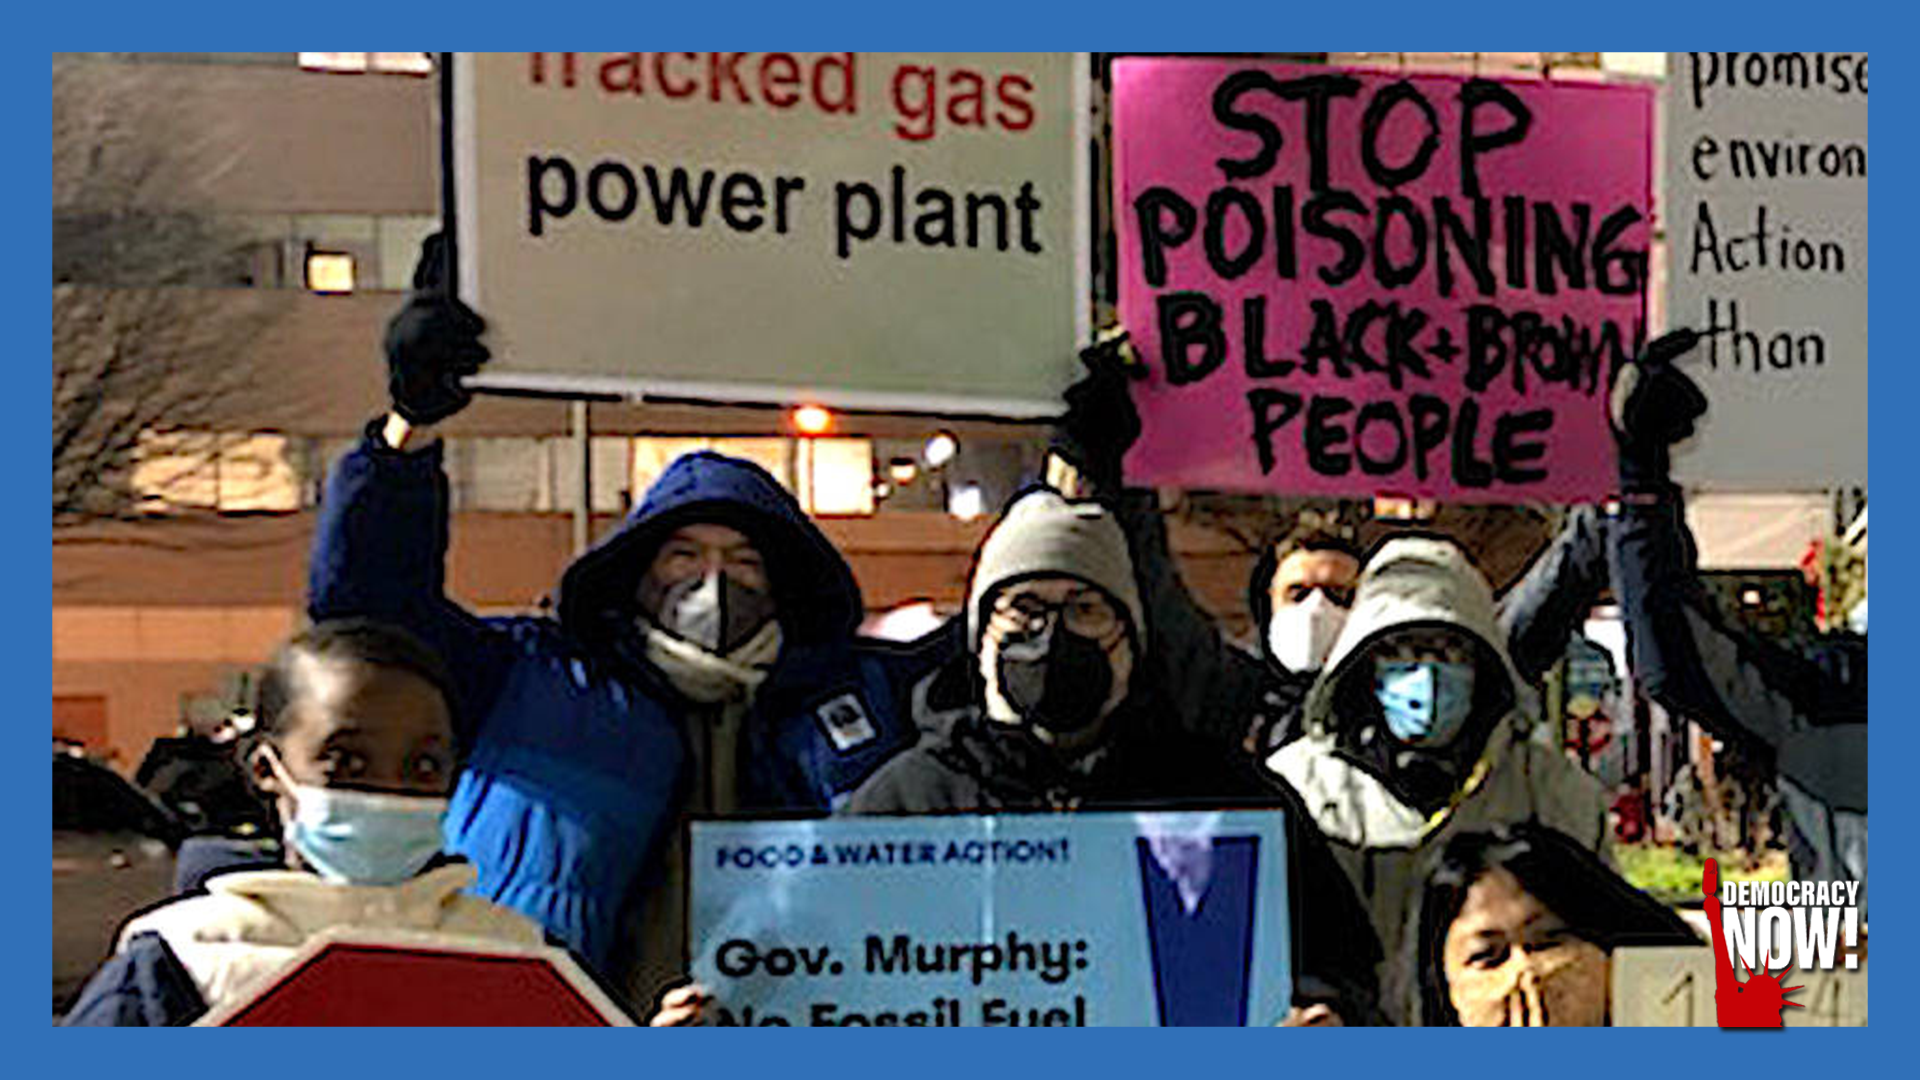 Environmental Justice Activists Want NJ Gov. to Vote No New Gas-Fired Power Plant in Newark